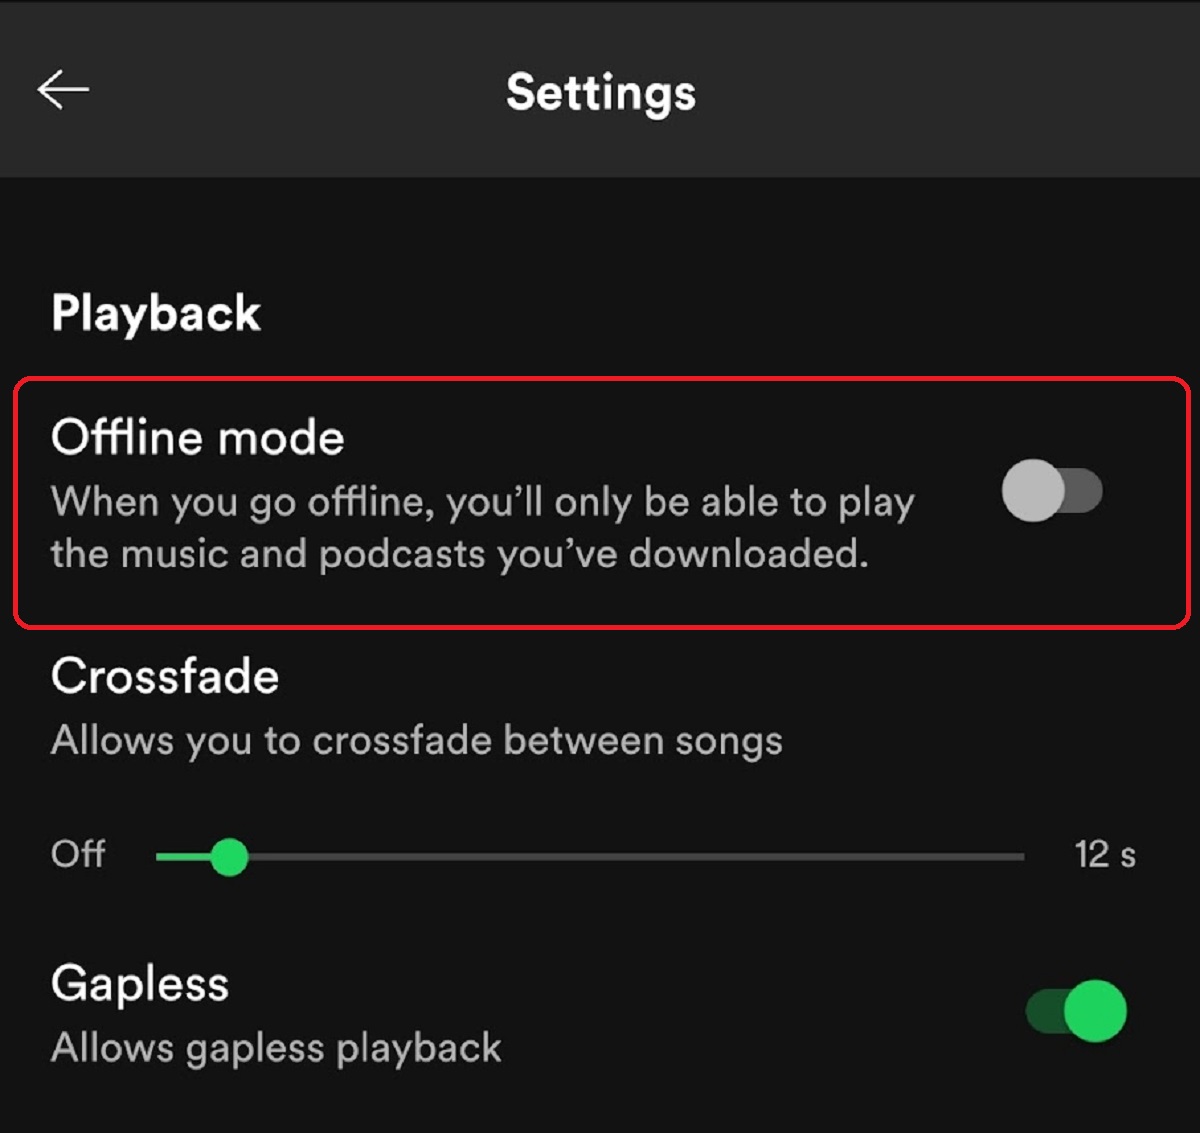 Spotify settings screenshot with the Offline mode feature highlighted in red